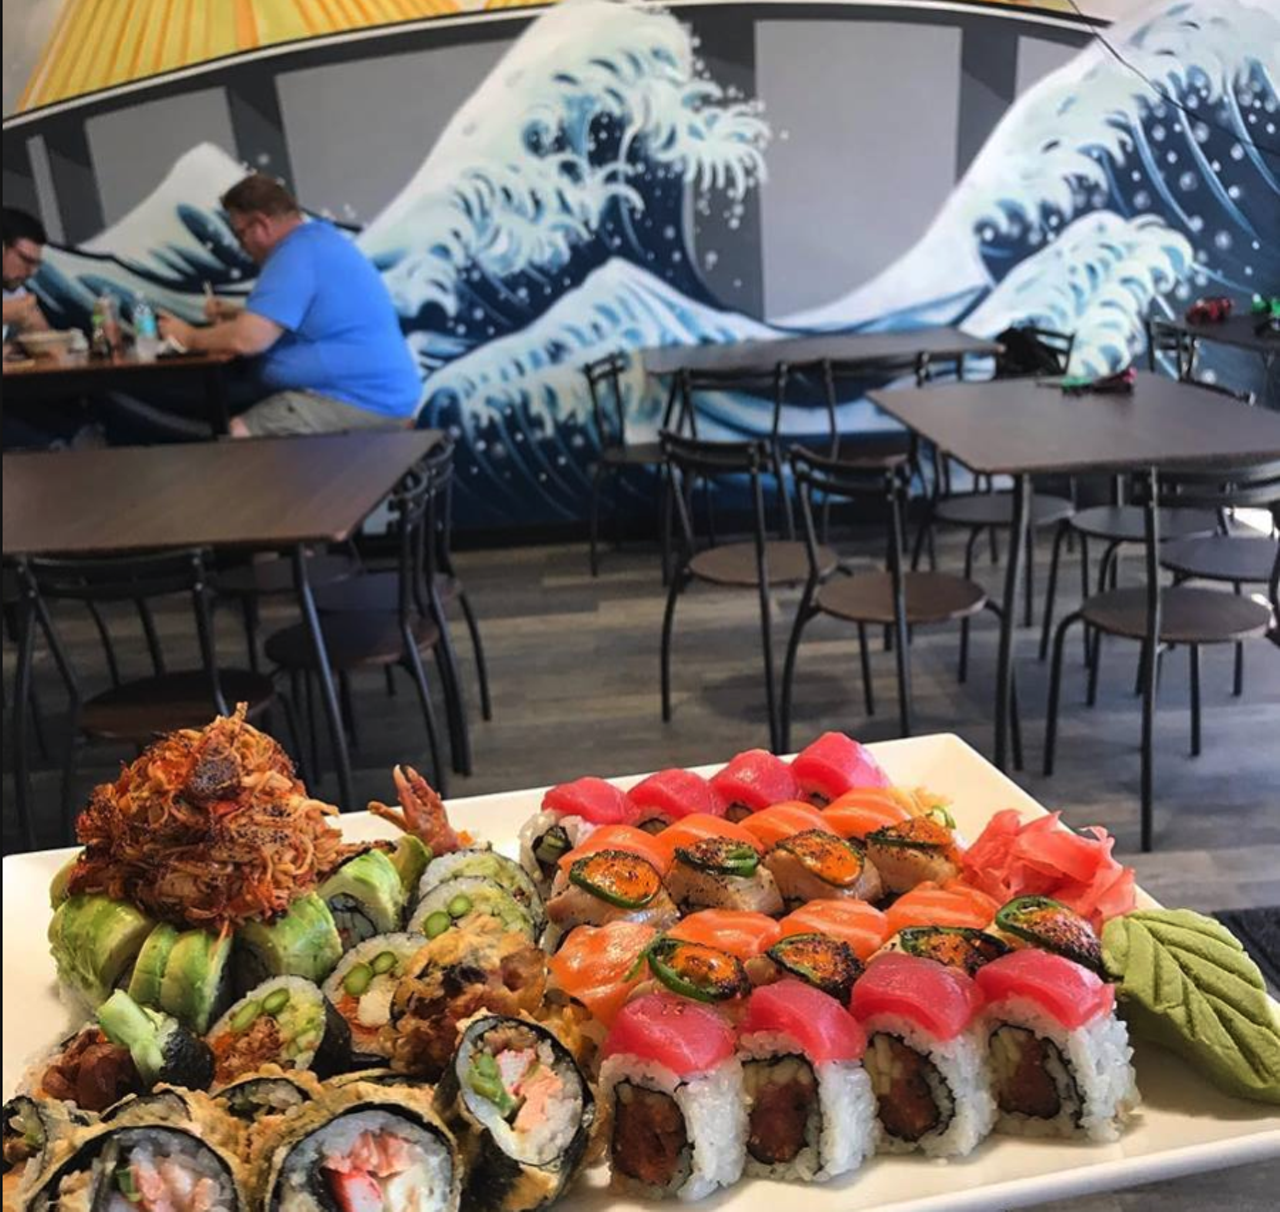 Ikigai Sushi St. Pete   
4195 54th Avenue N., St. Petersburg
This spot offers weekly specials including $3 hand rolls on Tuesdays. A selection of craft brews are available - as well as games for those who want to drink and hang. 
Photo via Ikigai Sushi St. Pete/ Facebook 